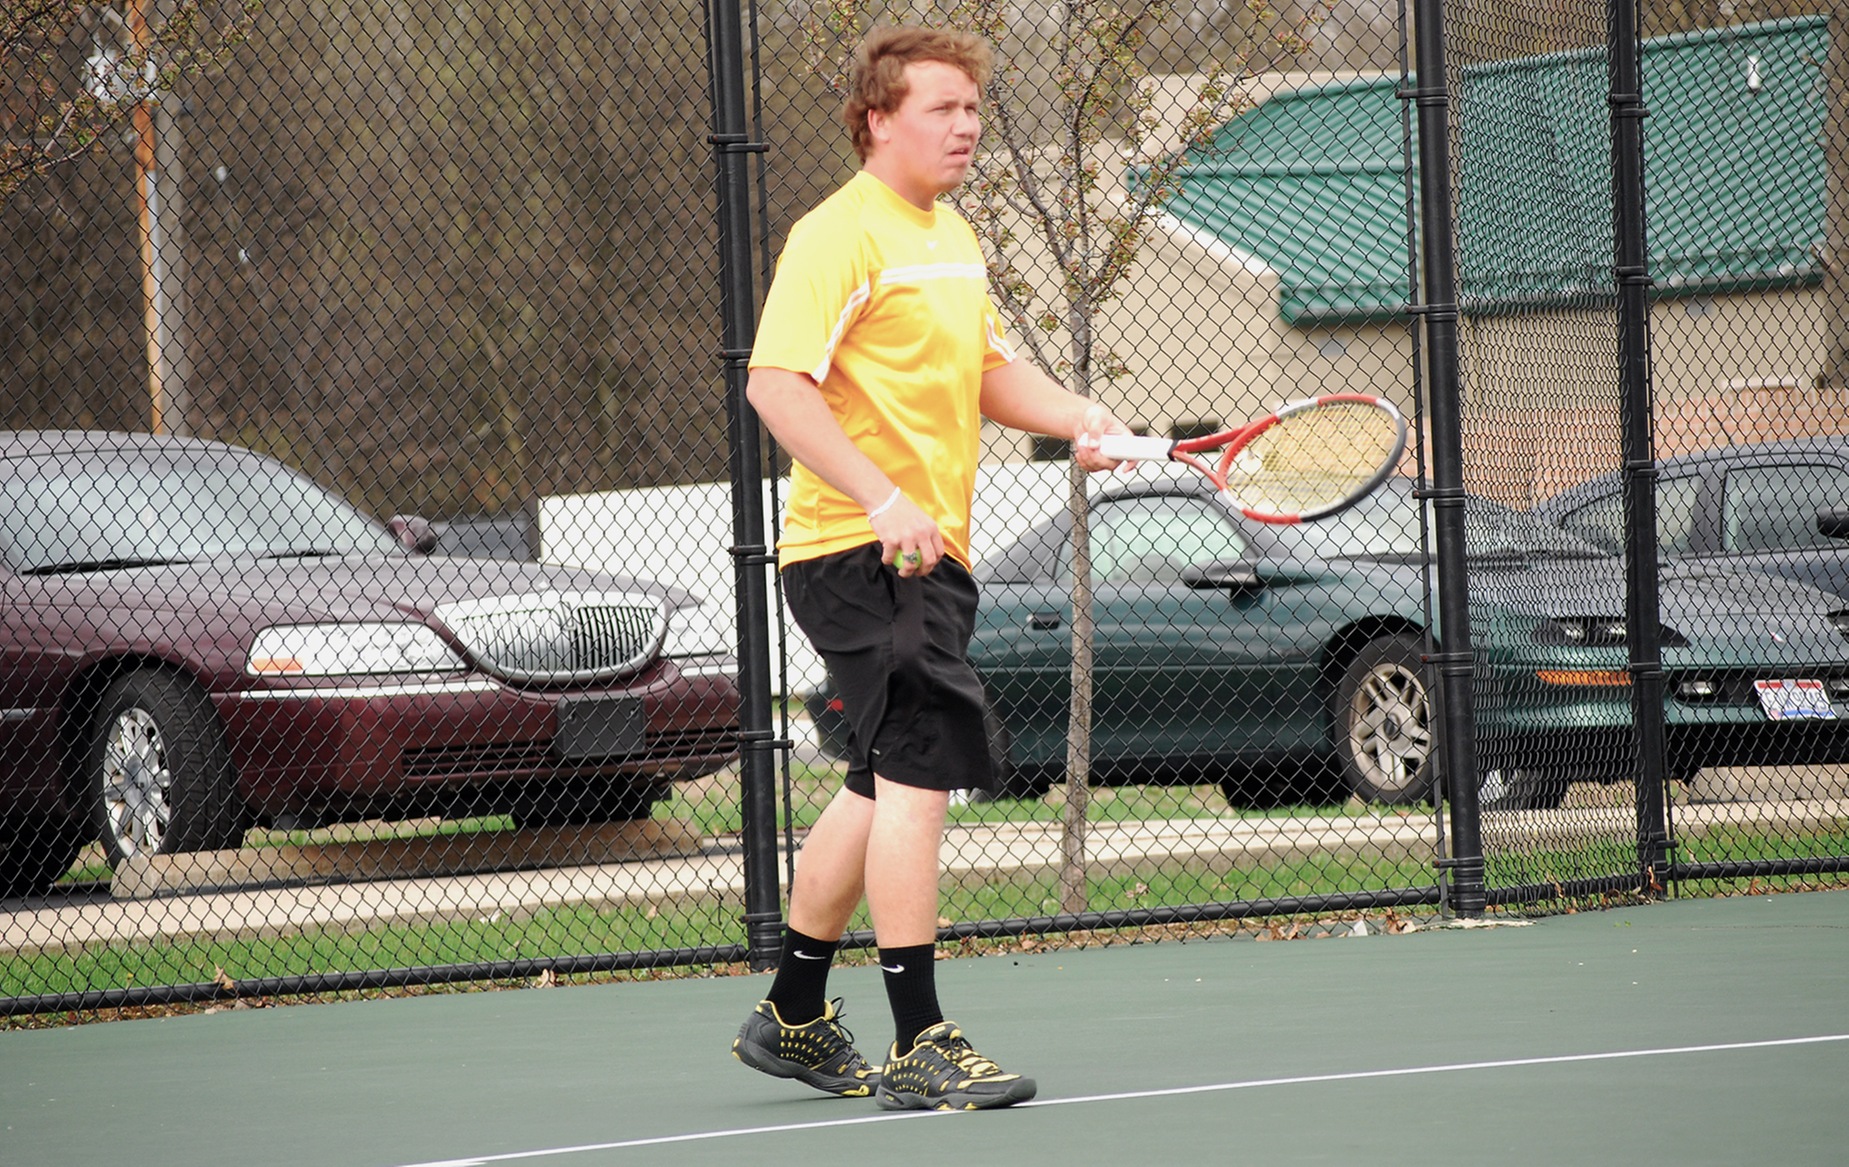 Jackets Top Anderson, Fall to Transylvania in Men’s Tennis